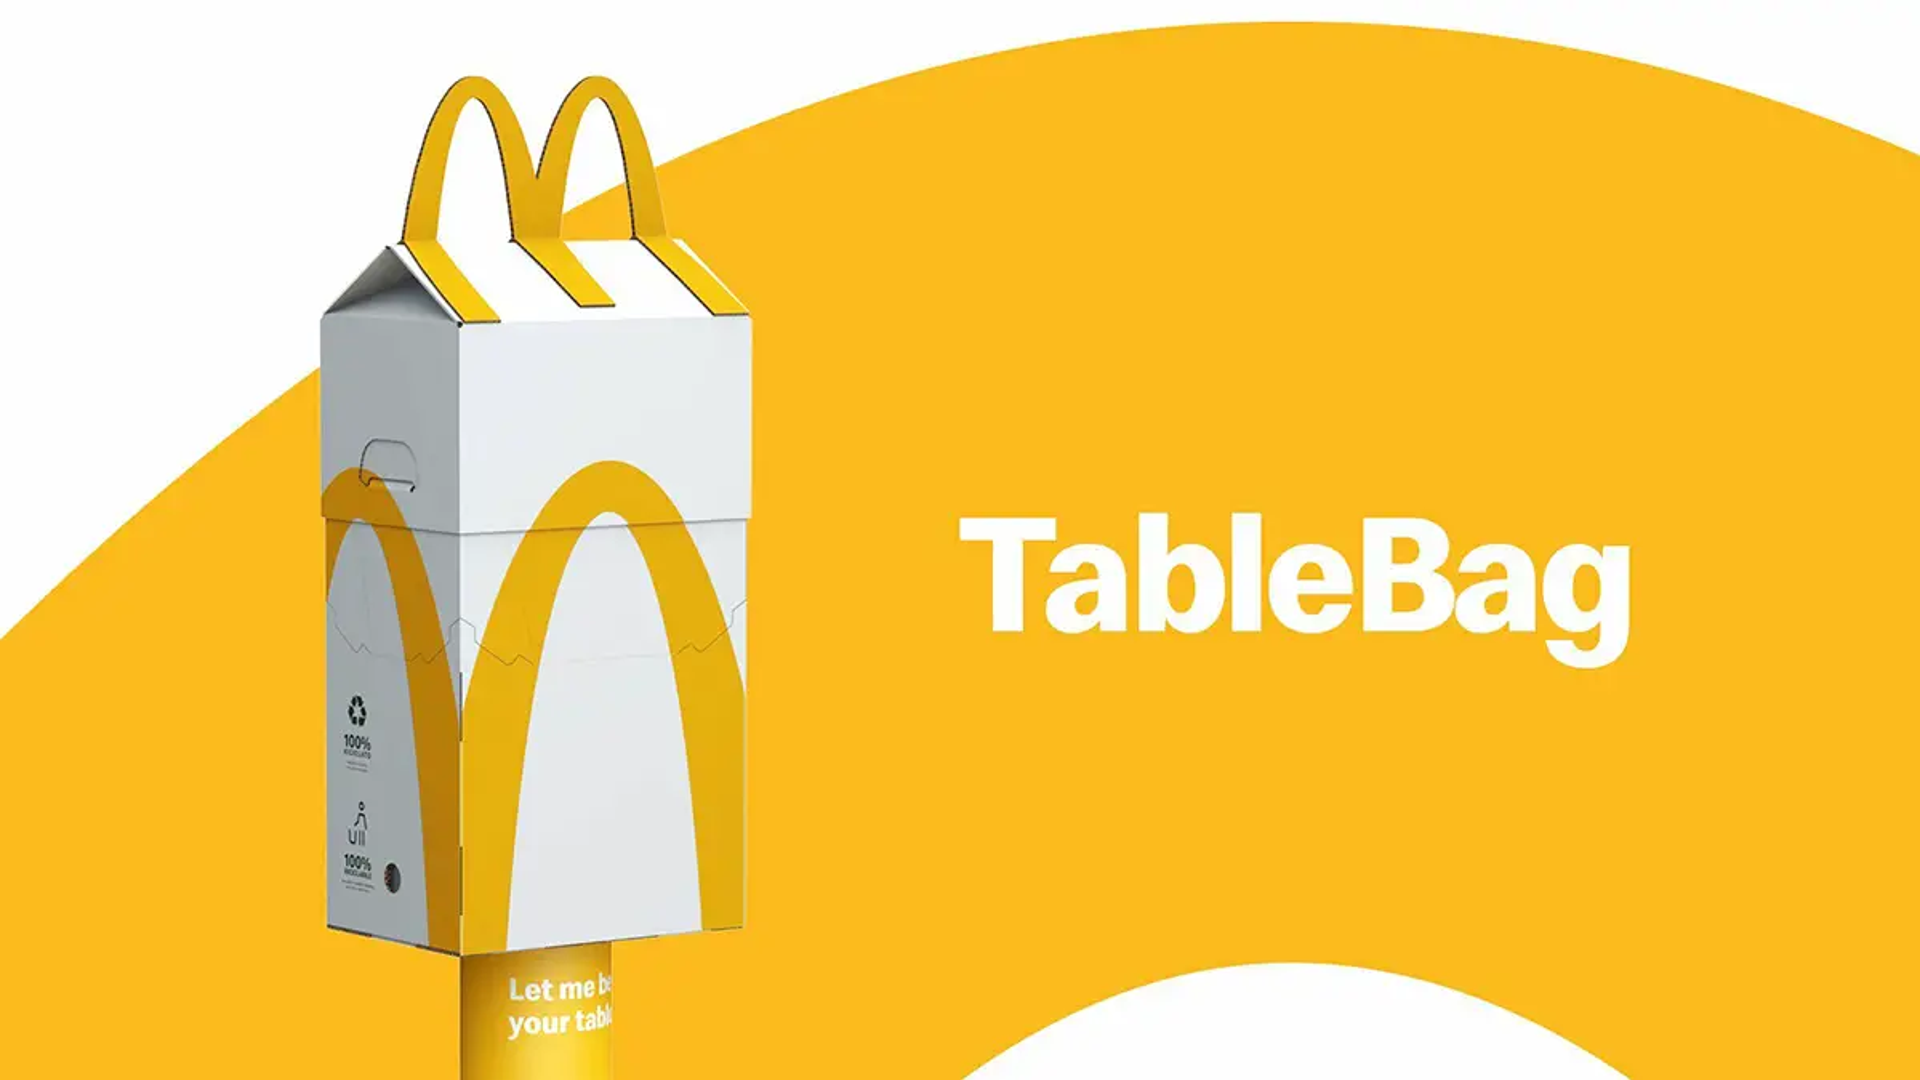 Featured image for McDonald’s Makes Takeout Even More Convenient With TableBag